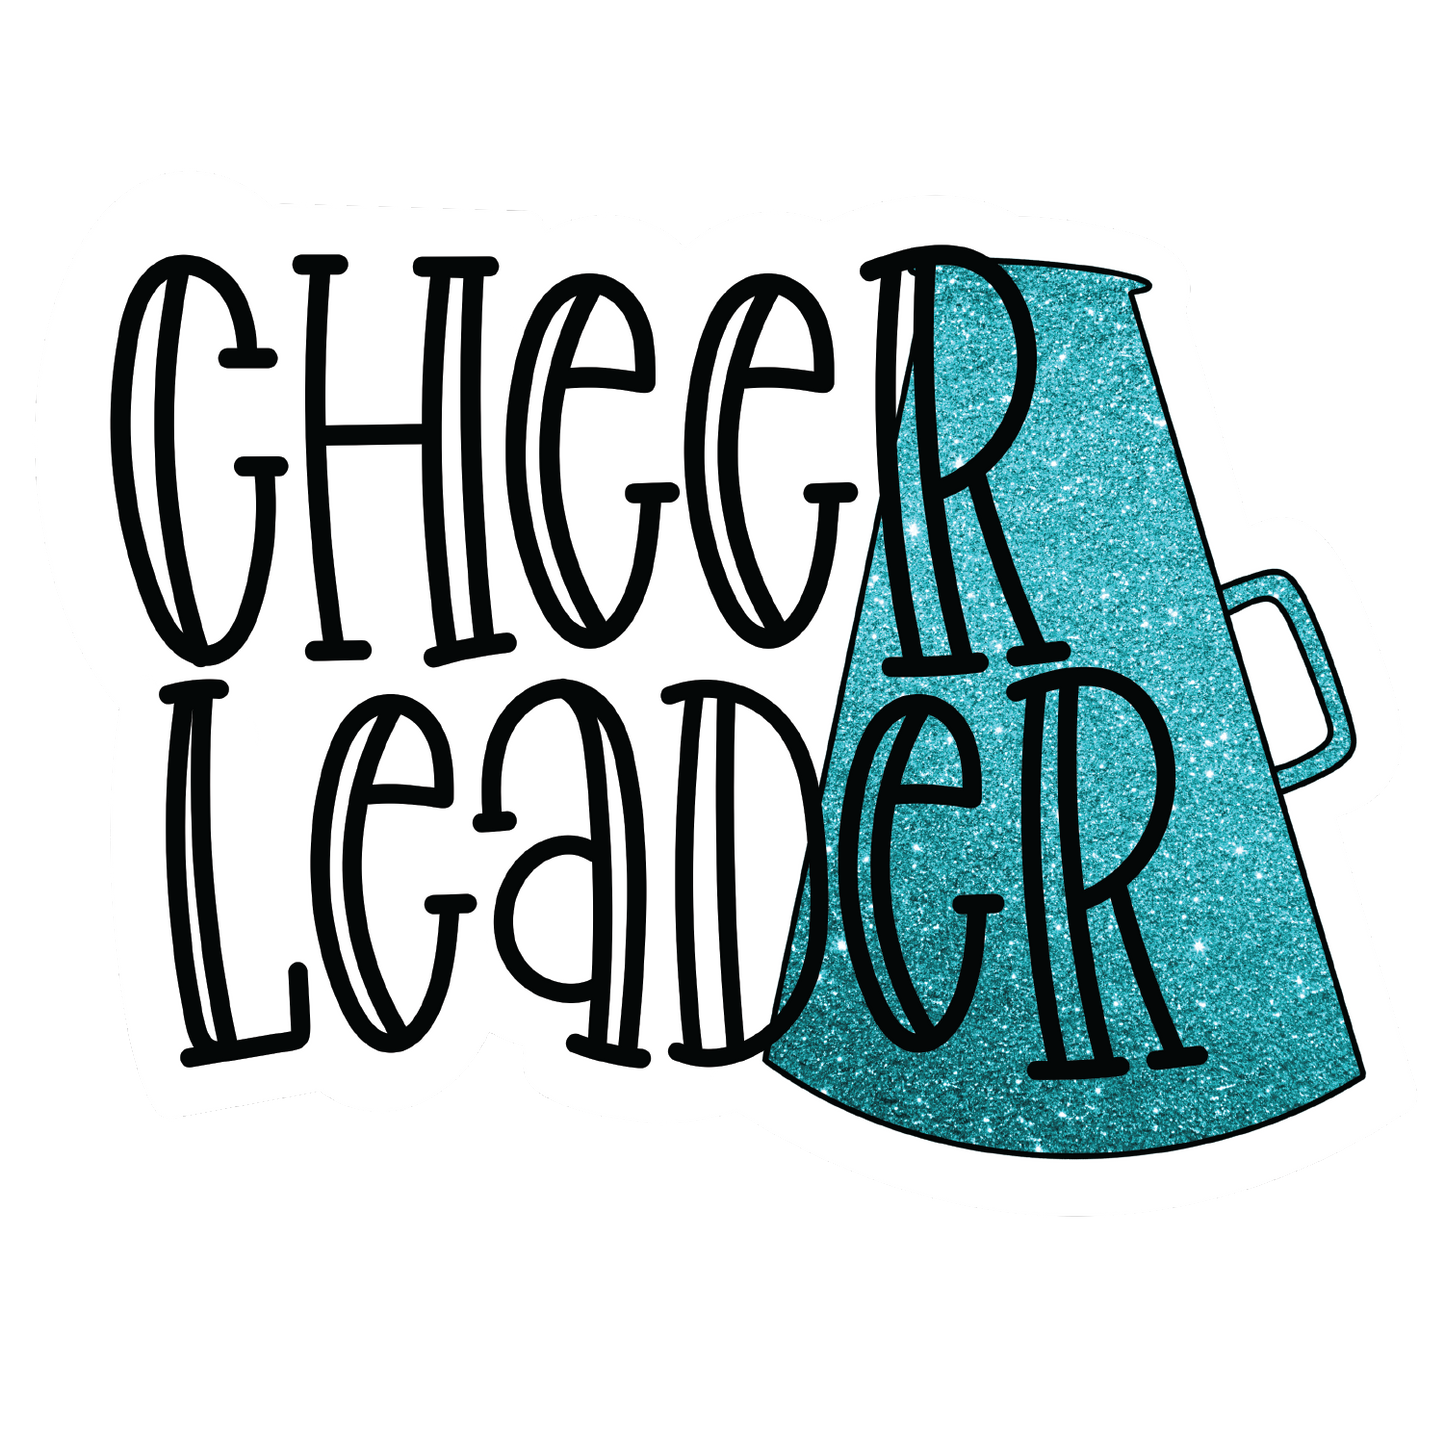 Cheer Stickers